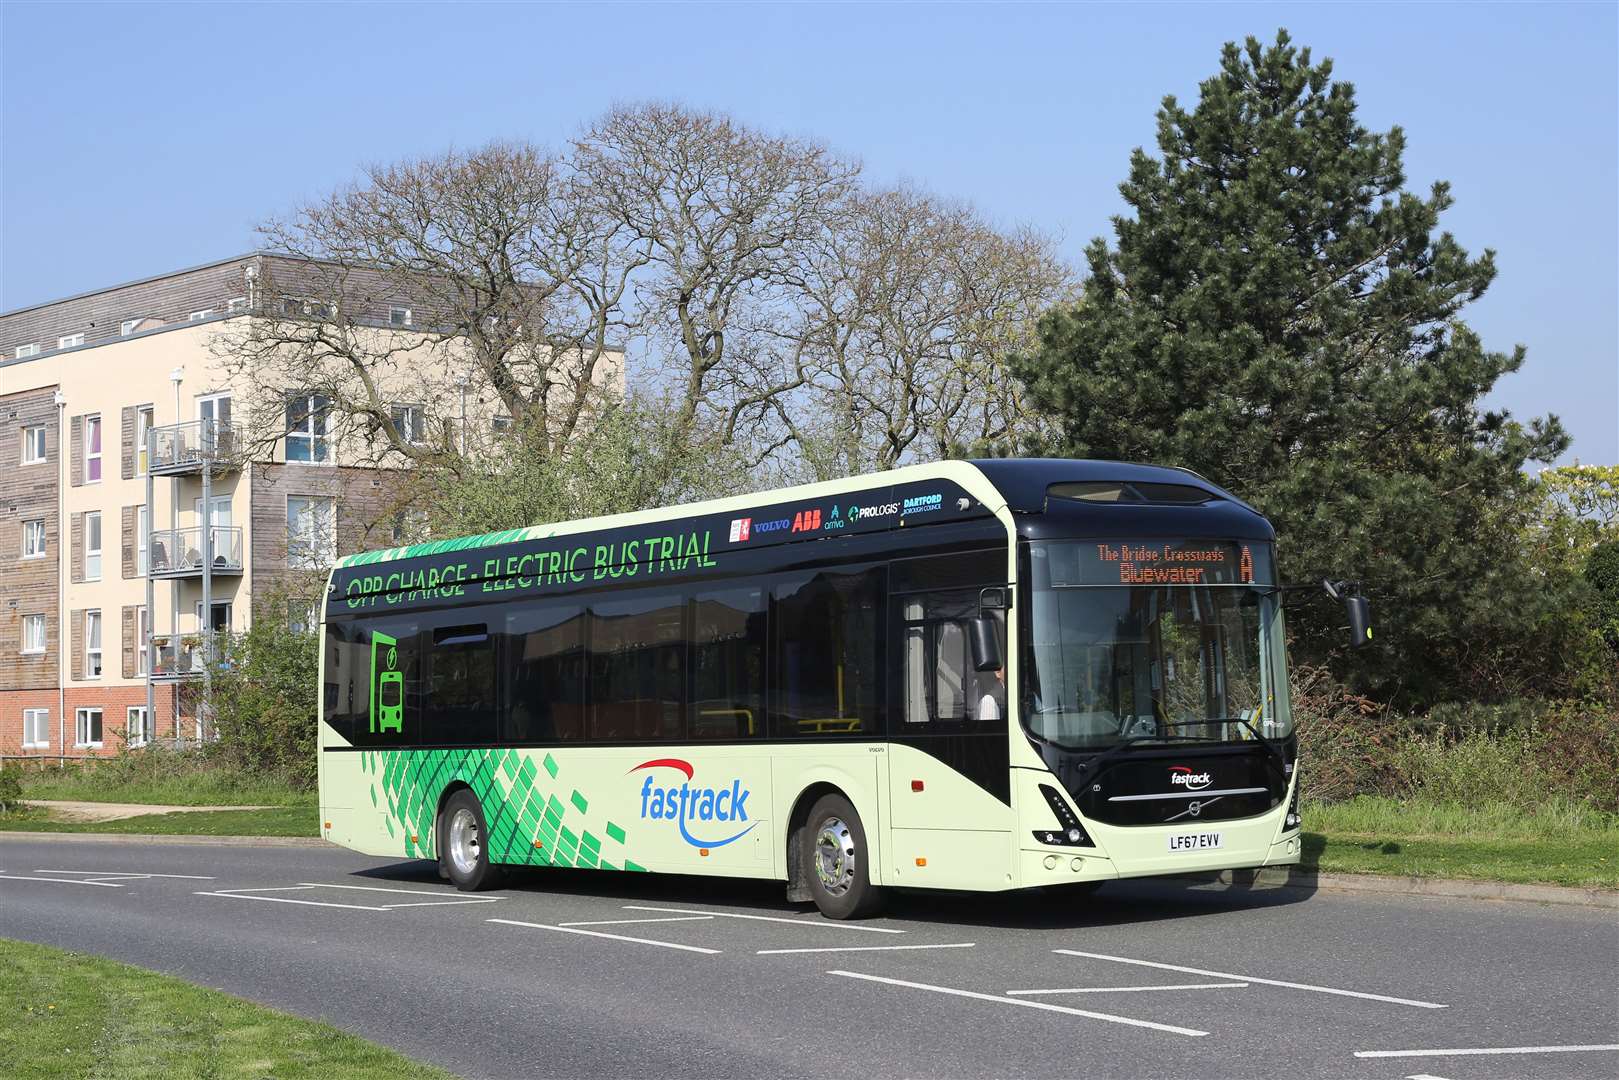 New electric buses are coming to Dartford as part of an exclusive year-long trial